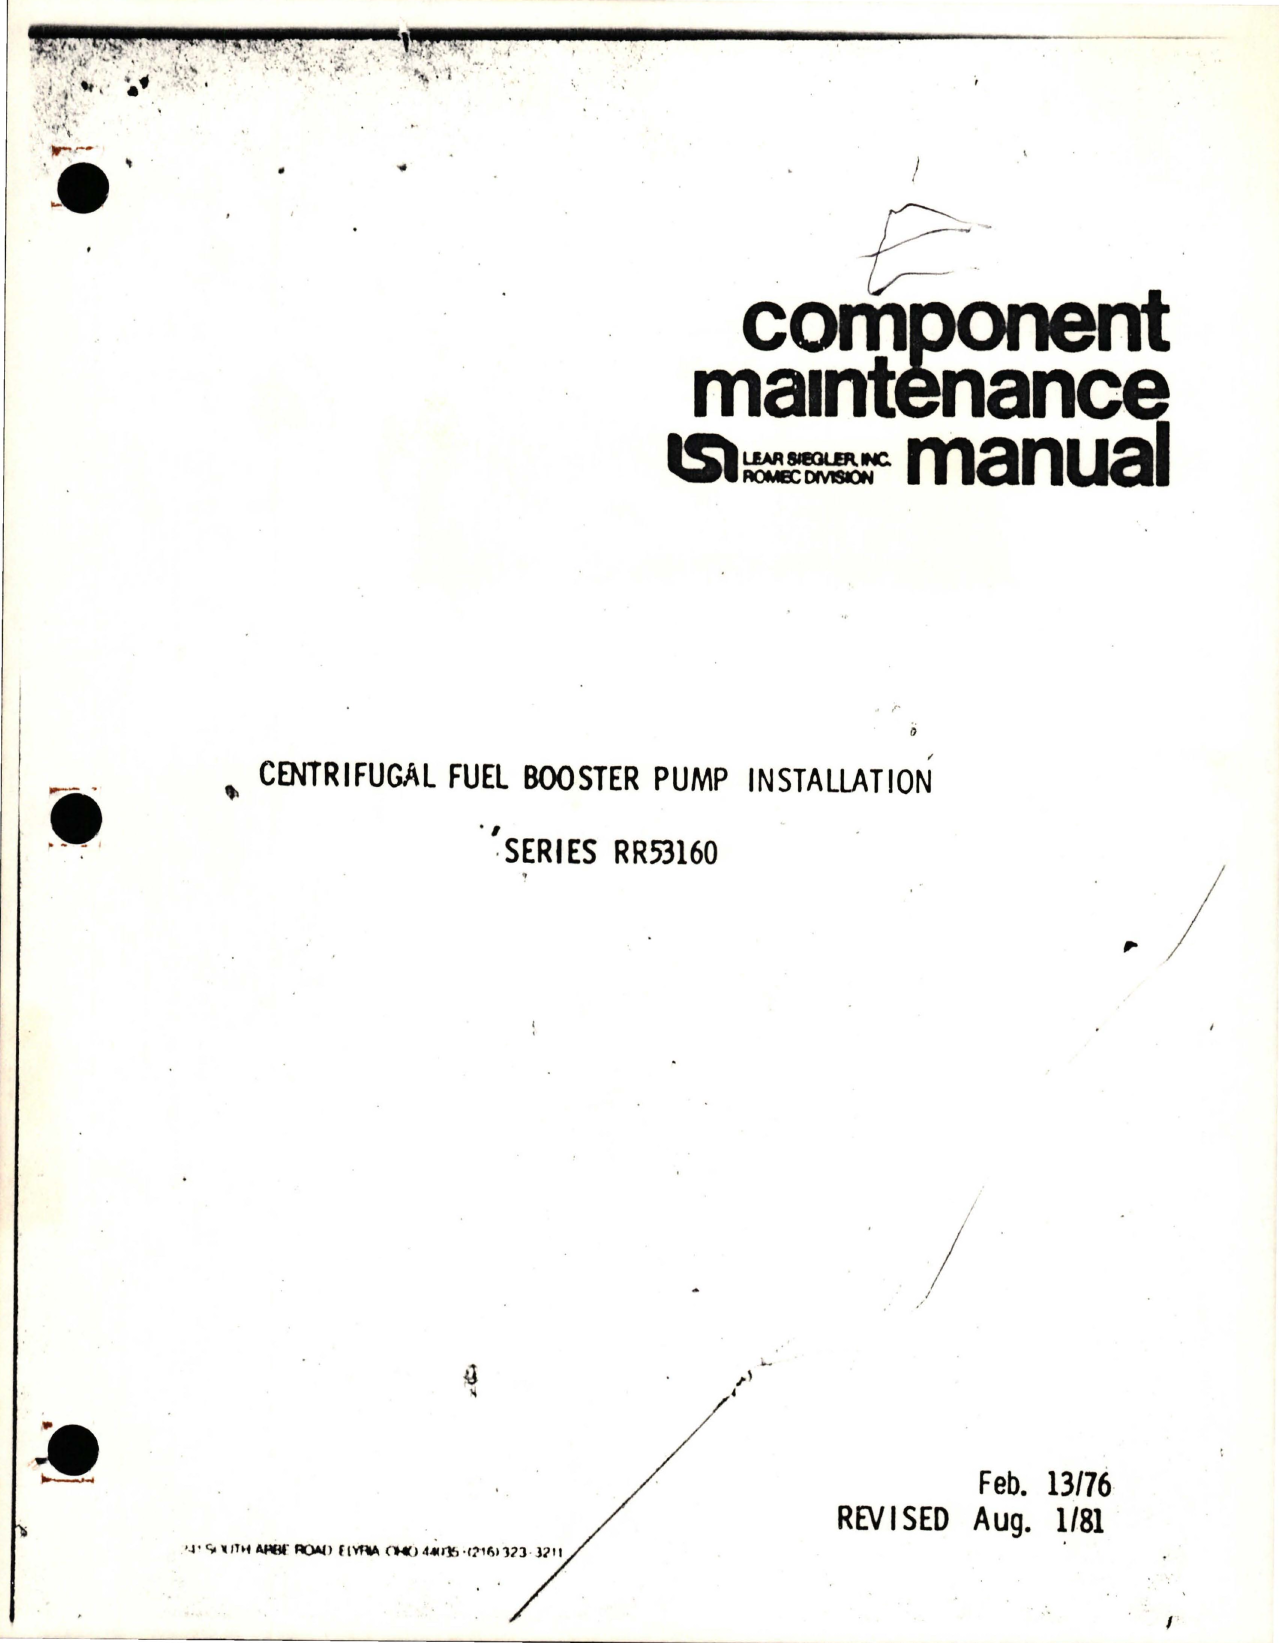 Sample page 1 from AirCorps Library document: Maintenance Manual for Centrifugal Fuel Booster Pump Installation - Series RR53160 